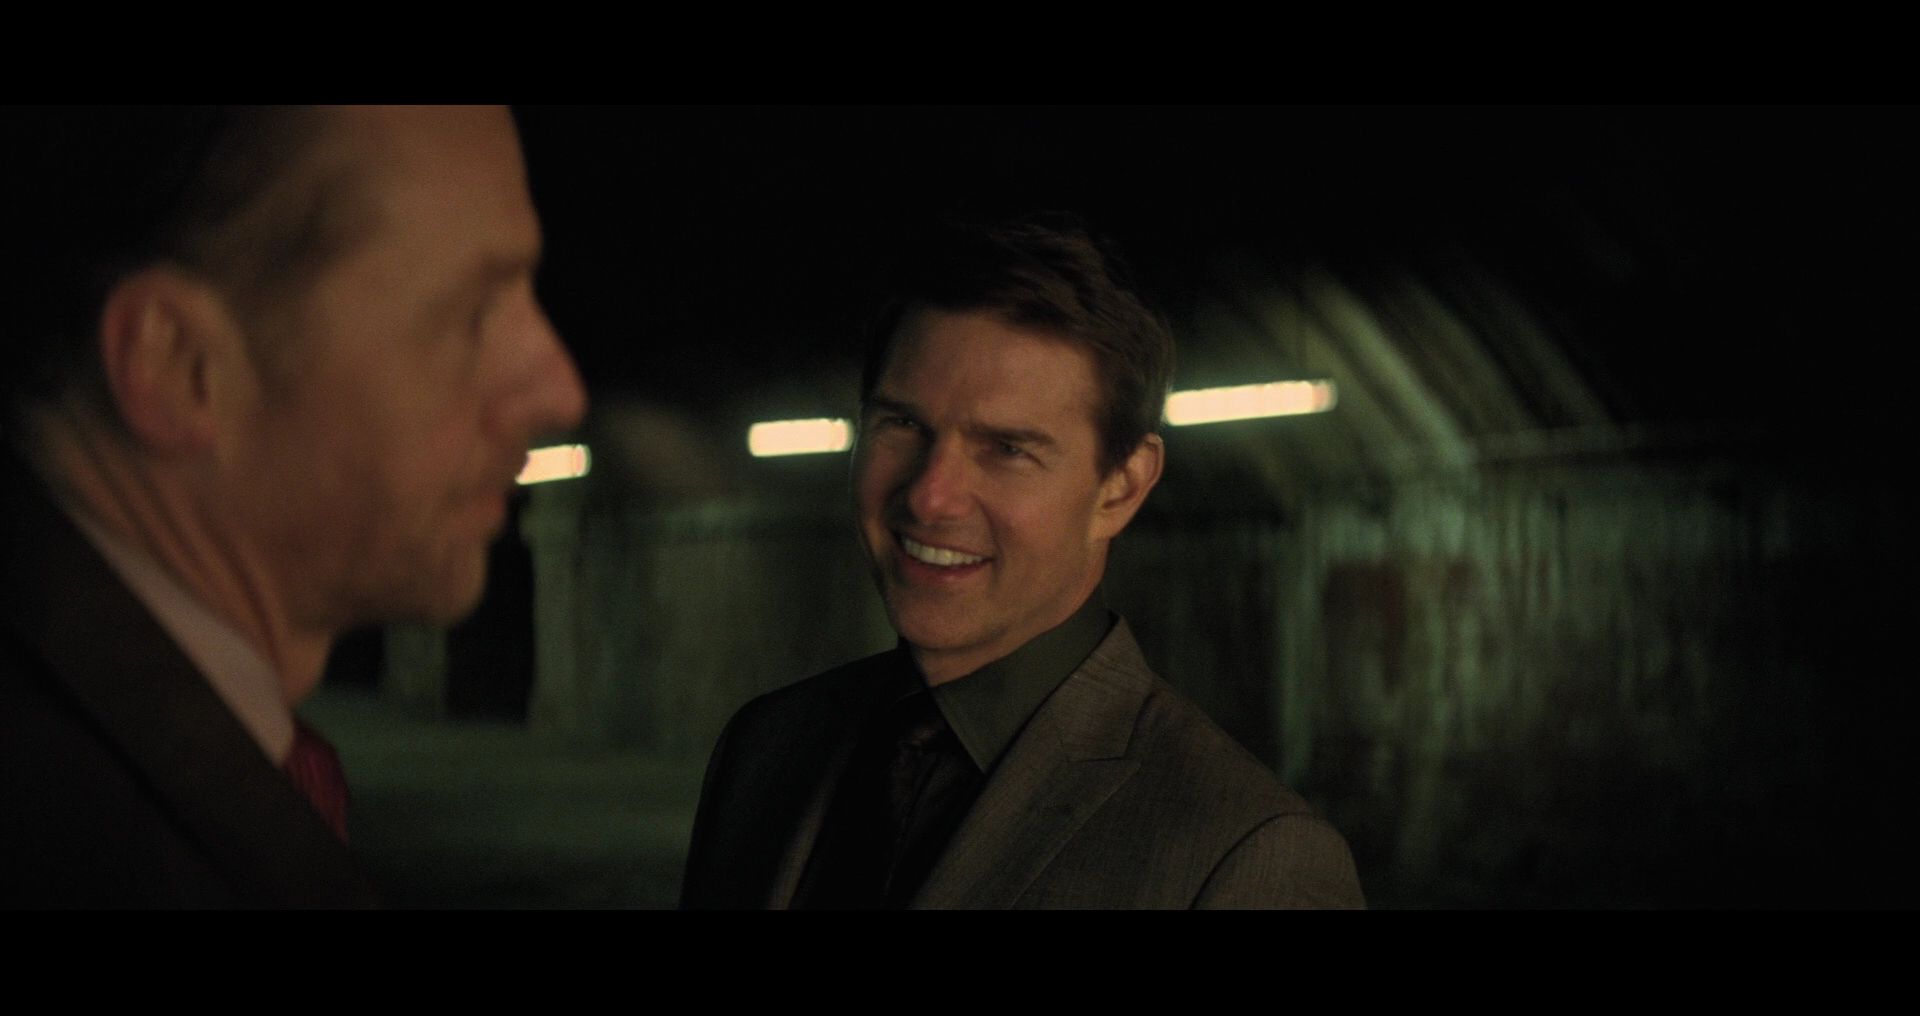 Mission-Impossible-Fallout-0168.jpg